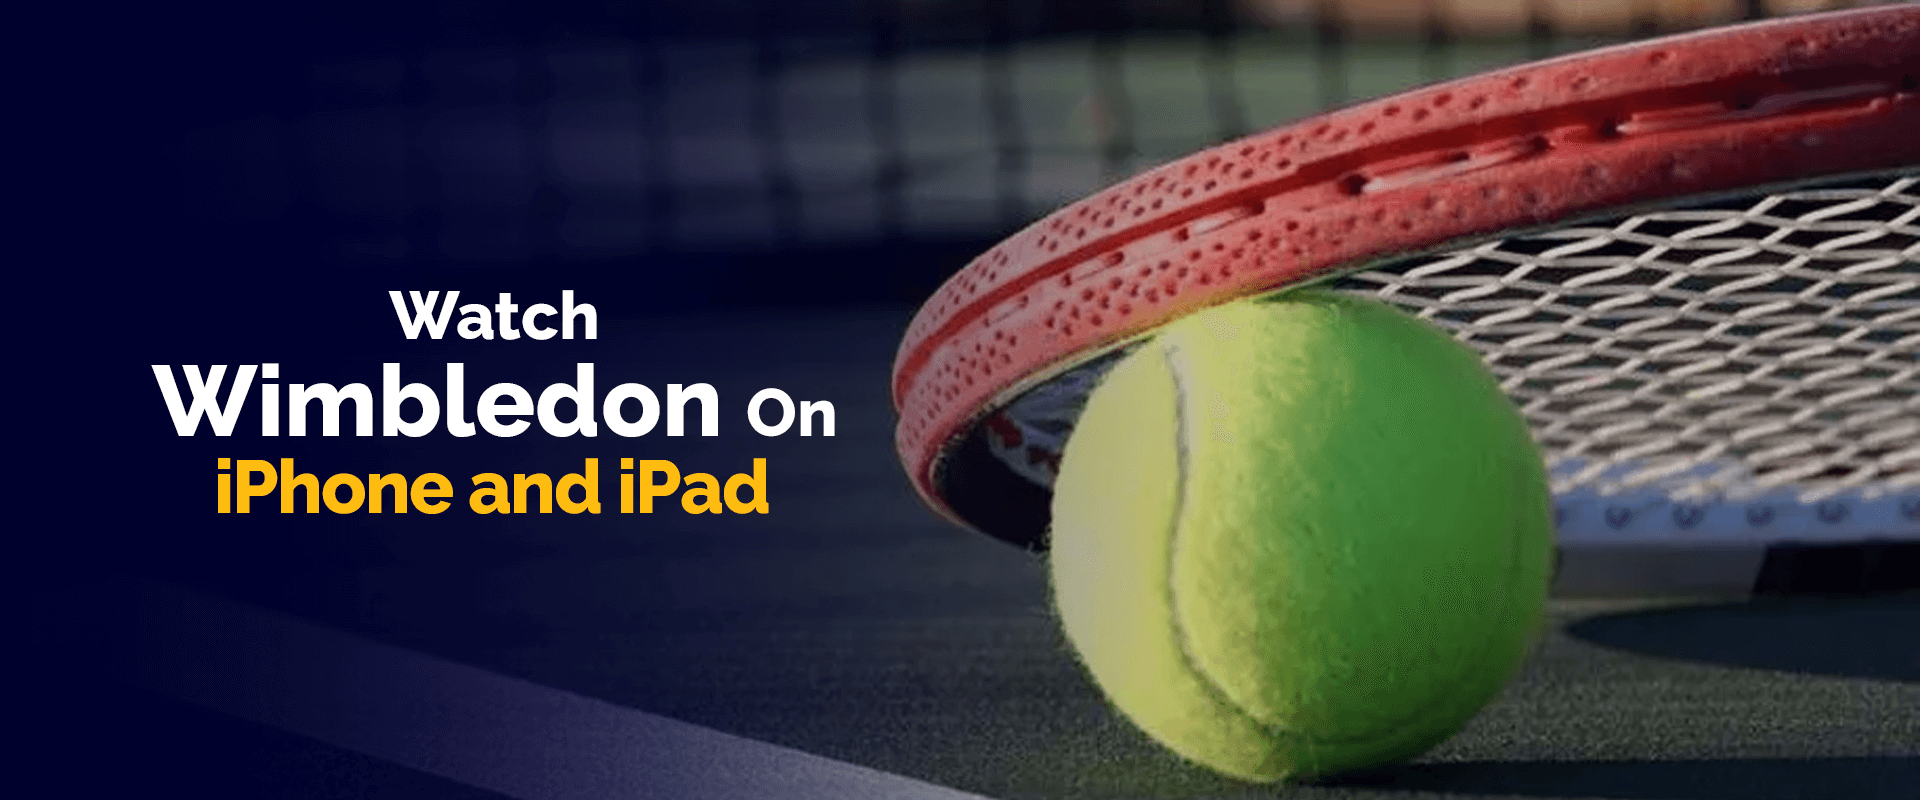 How to Watch Wimbledon on iPhone and iPad